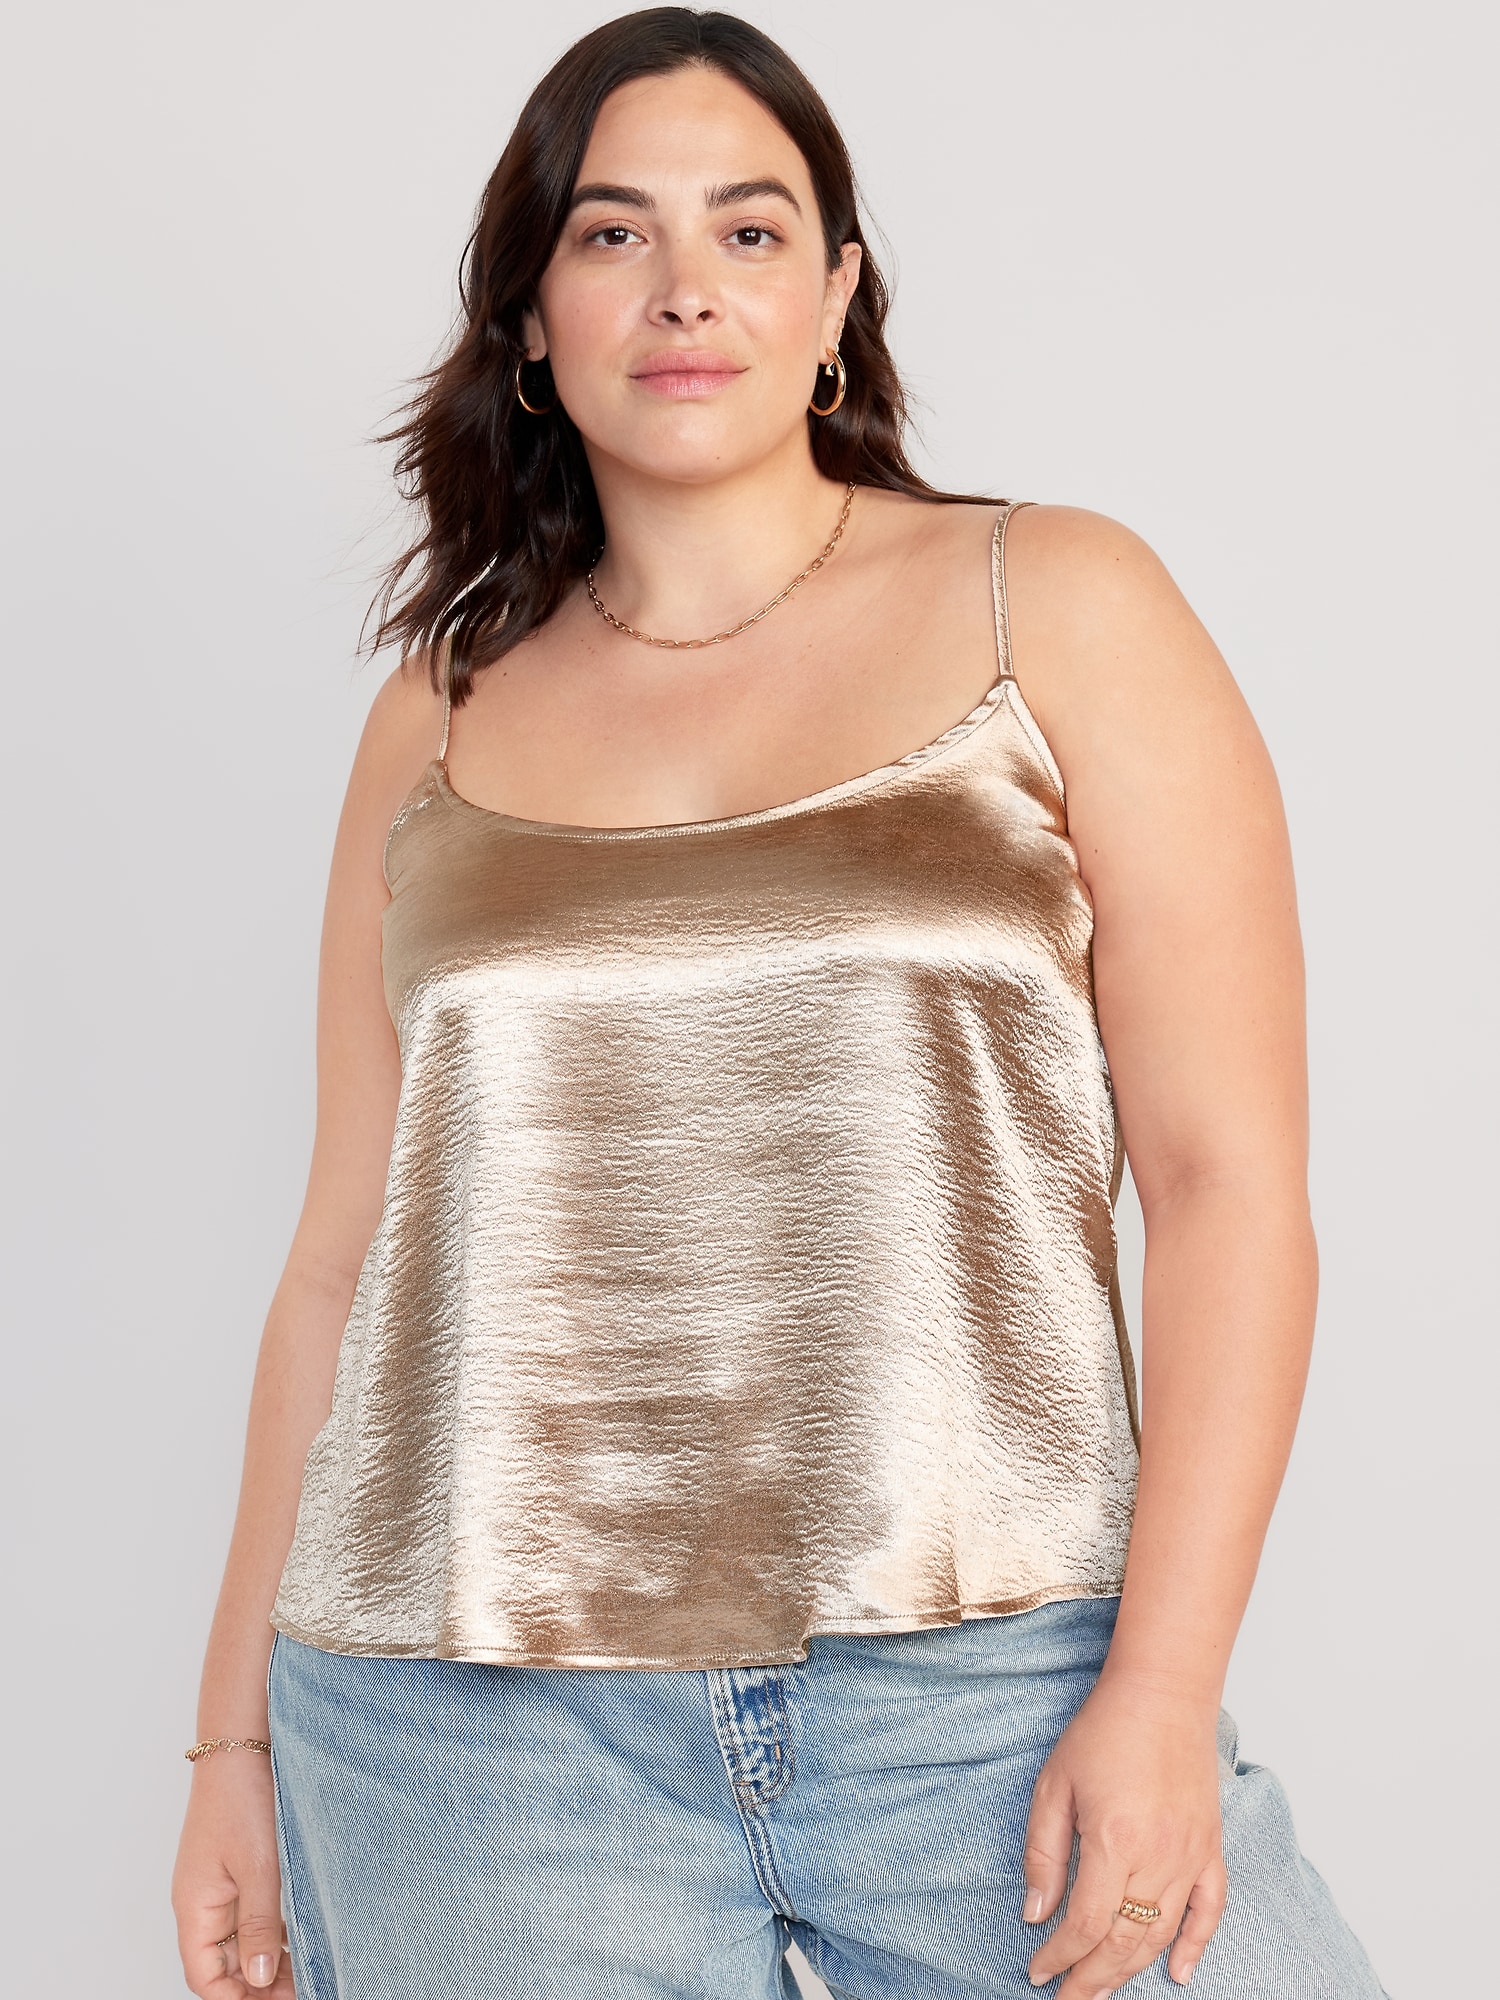 Satin Cami Top for Women | Old Navy